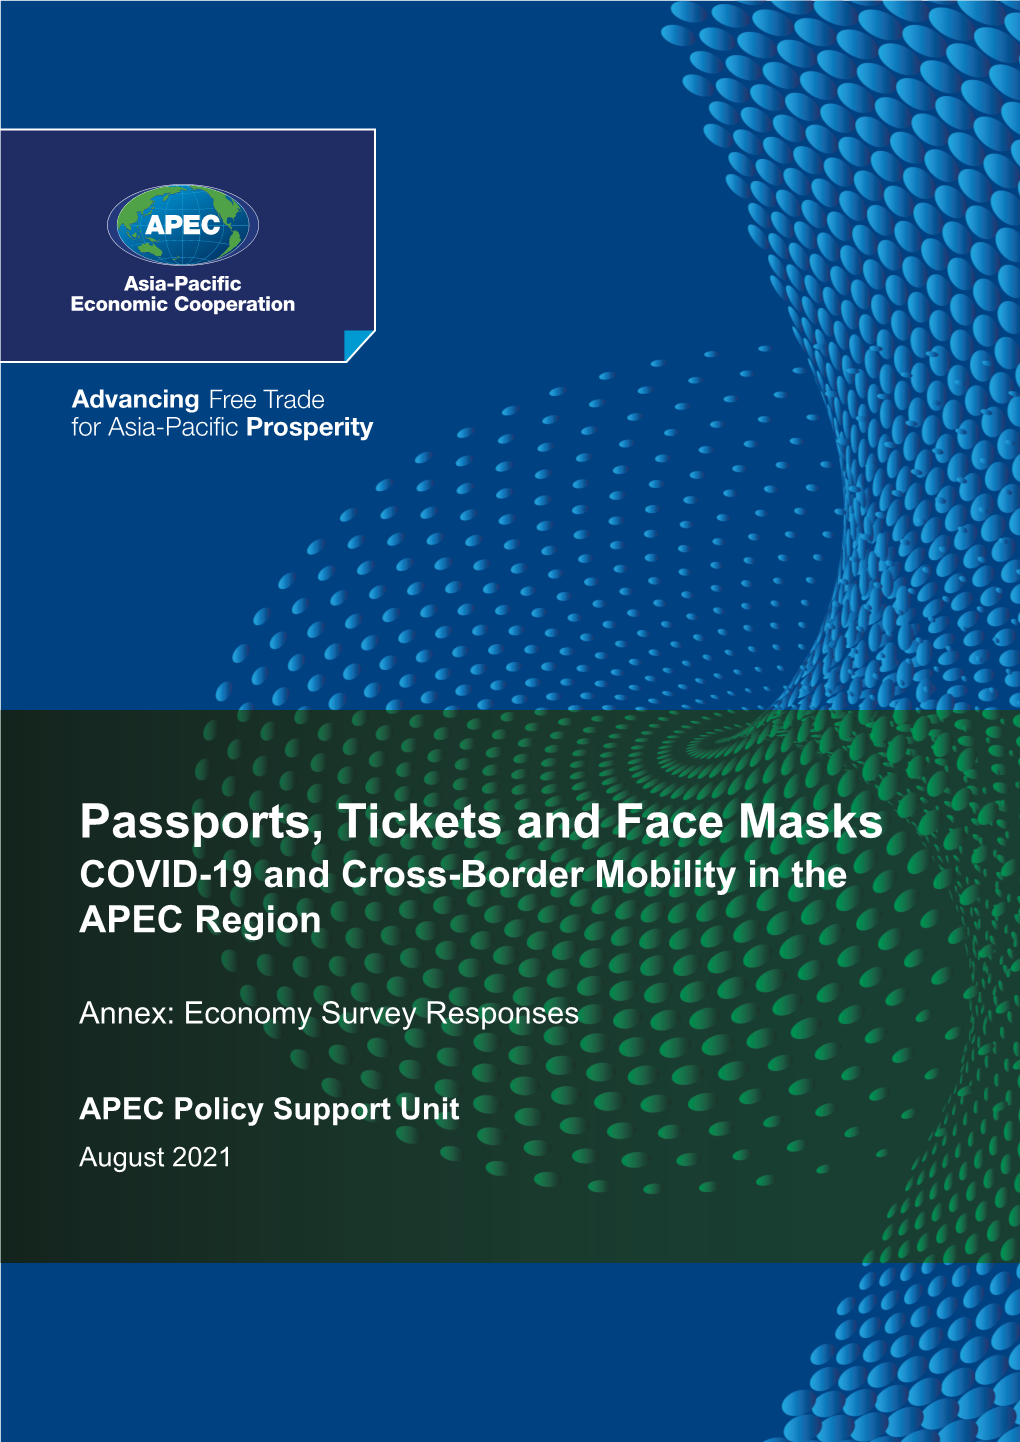 Passports, Tickets and Face Masks COVID-19 and Cross-Border Mobility in the APEC Region